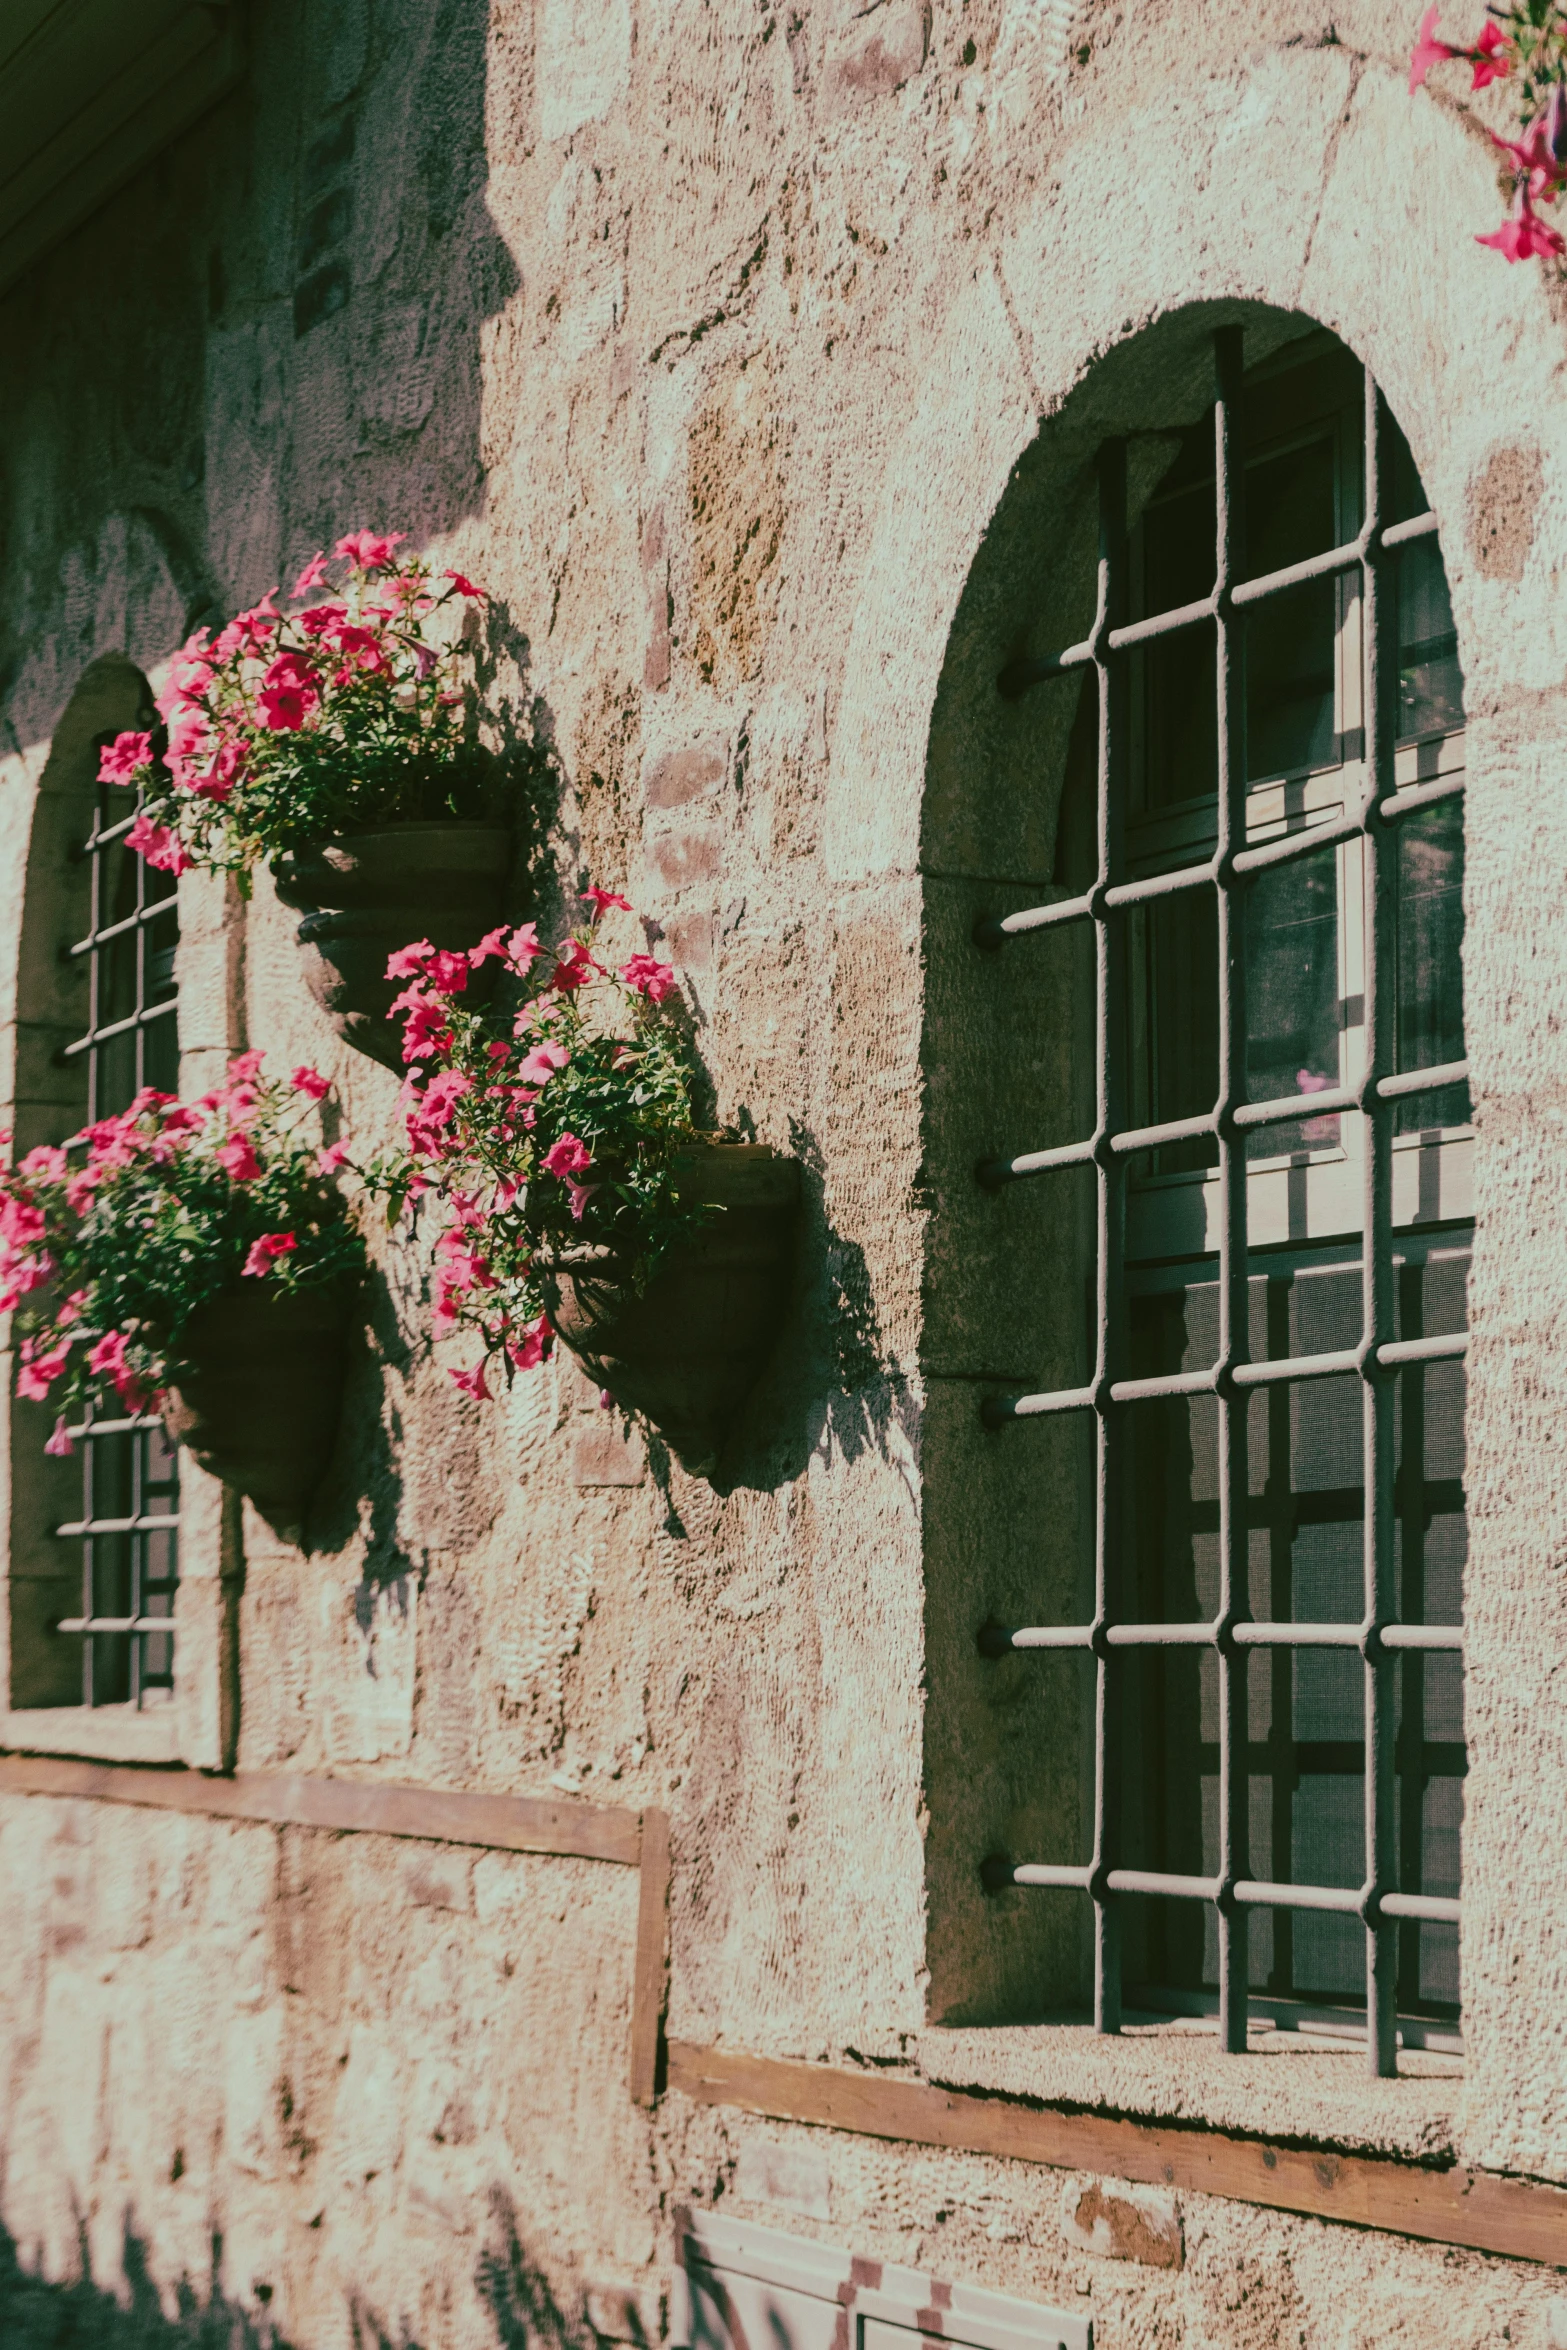 three windows and potted flowers with bars on them